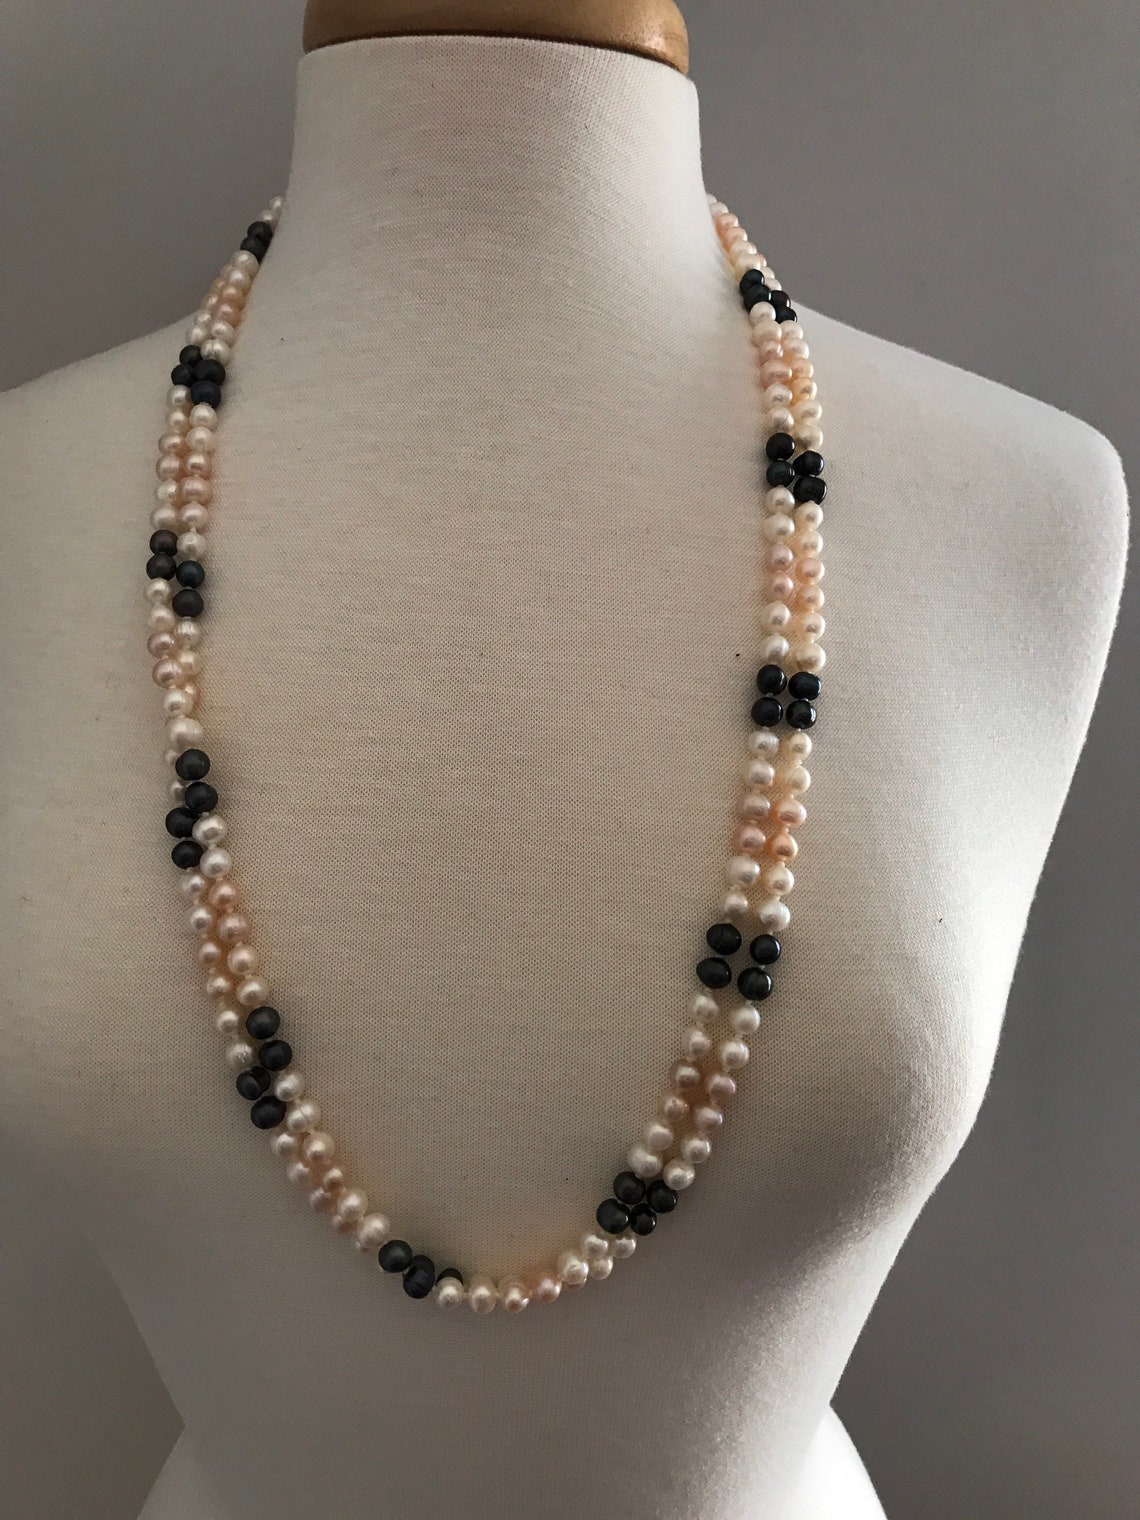 Vintage Long Pearl Rope Necklace Gray White Pink Beads | Etsy